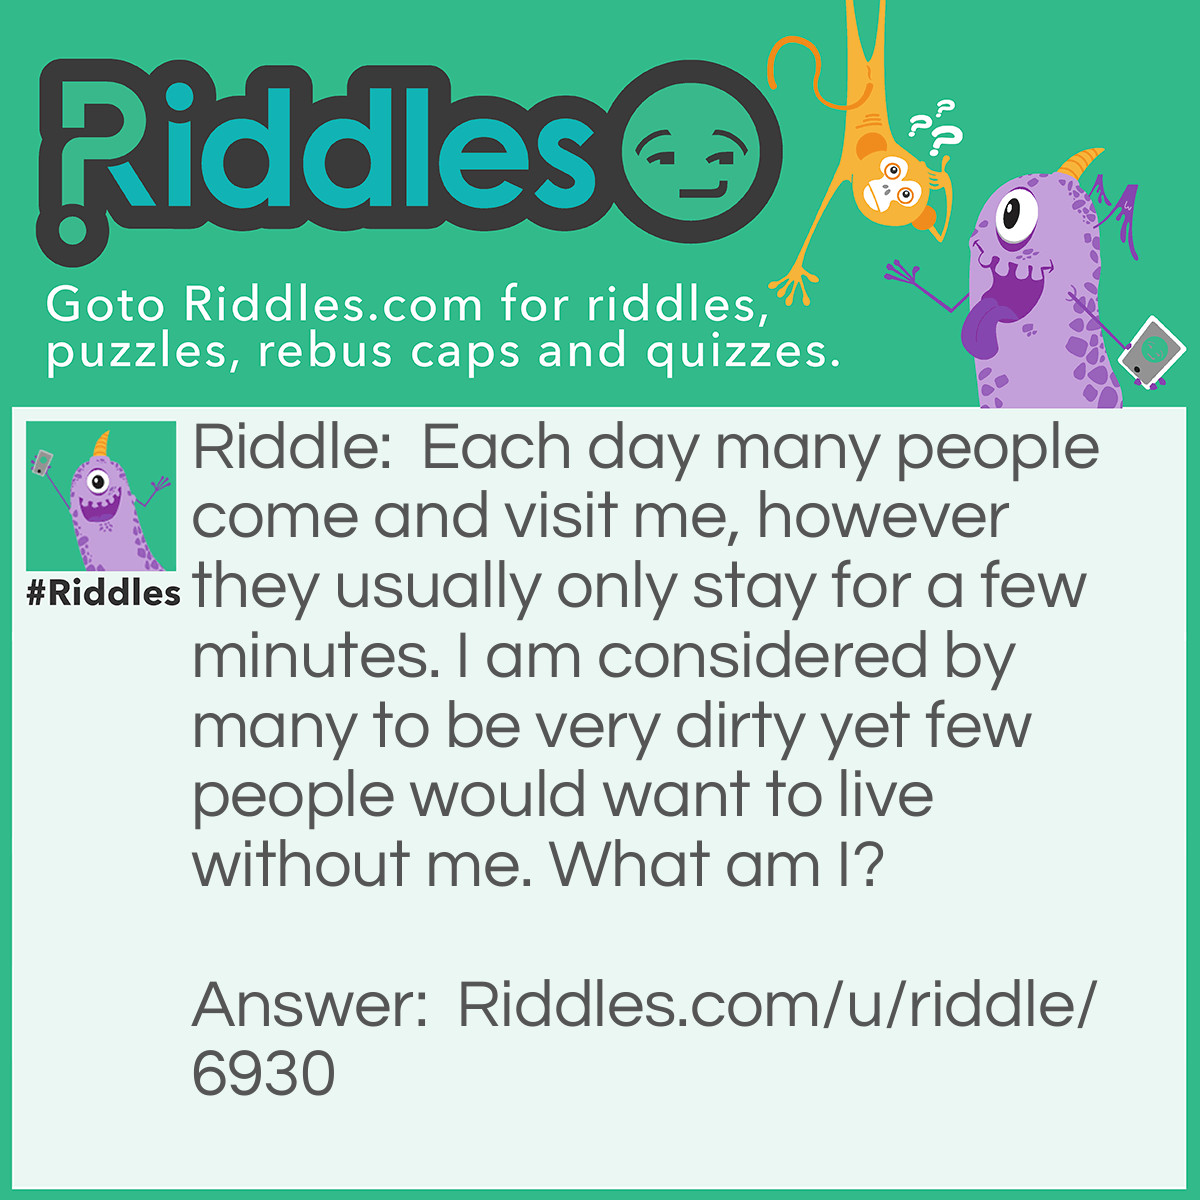 Riddle: Each day many people come and visit me, however they usually only stay for a few minutes. I am considered by many to be very dirty yet few people would want to live without me. What am I? Answer: A toilet.